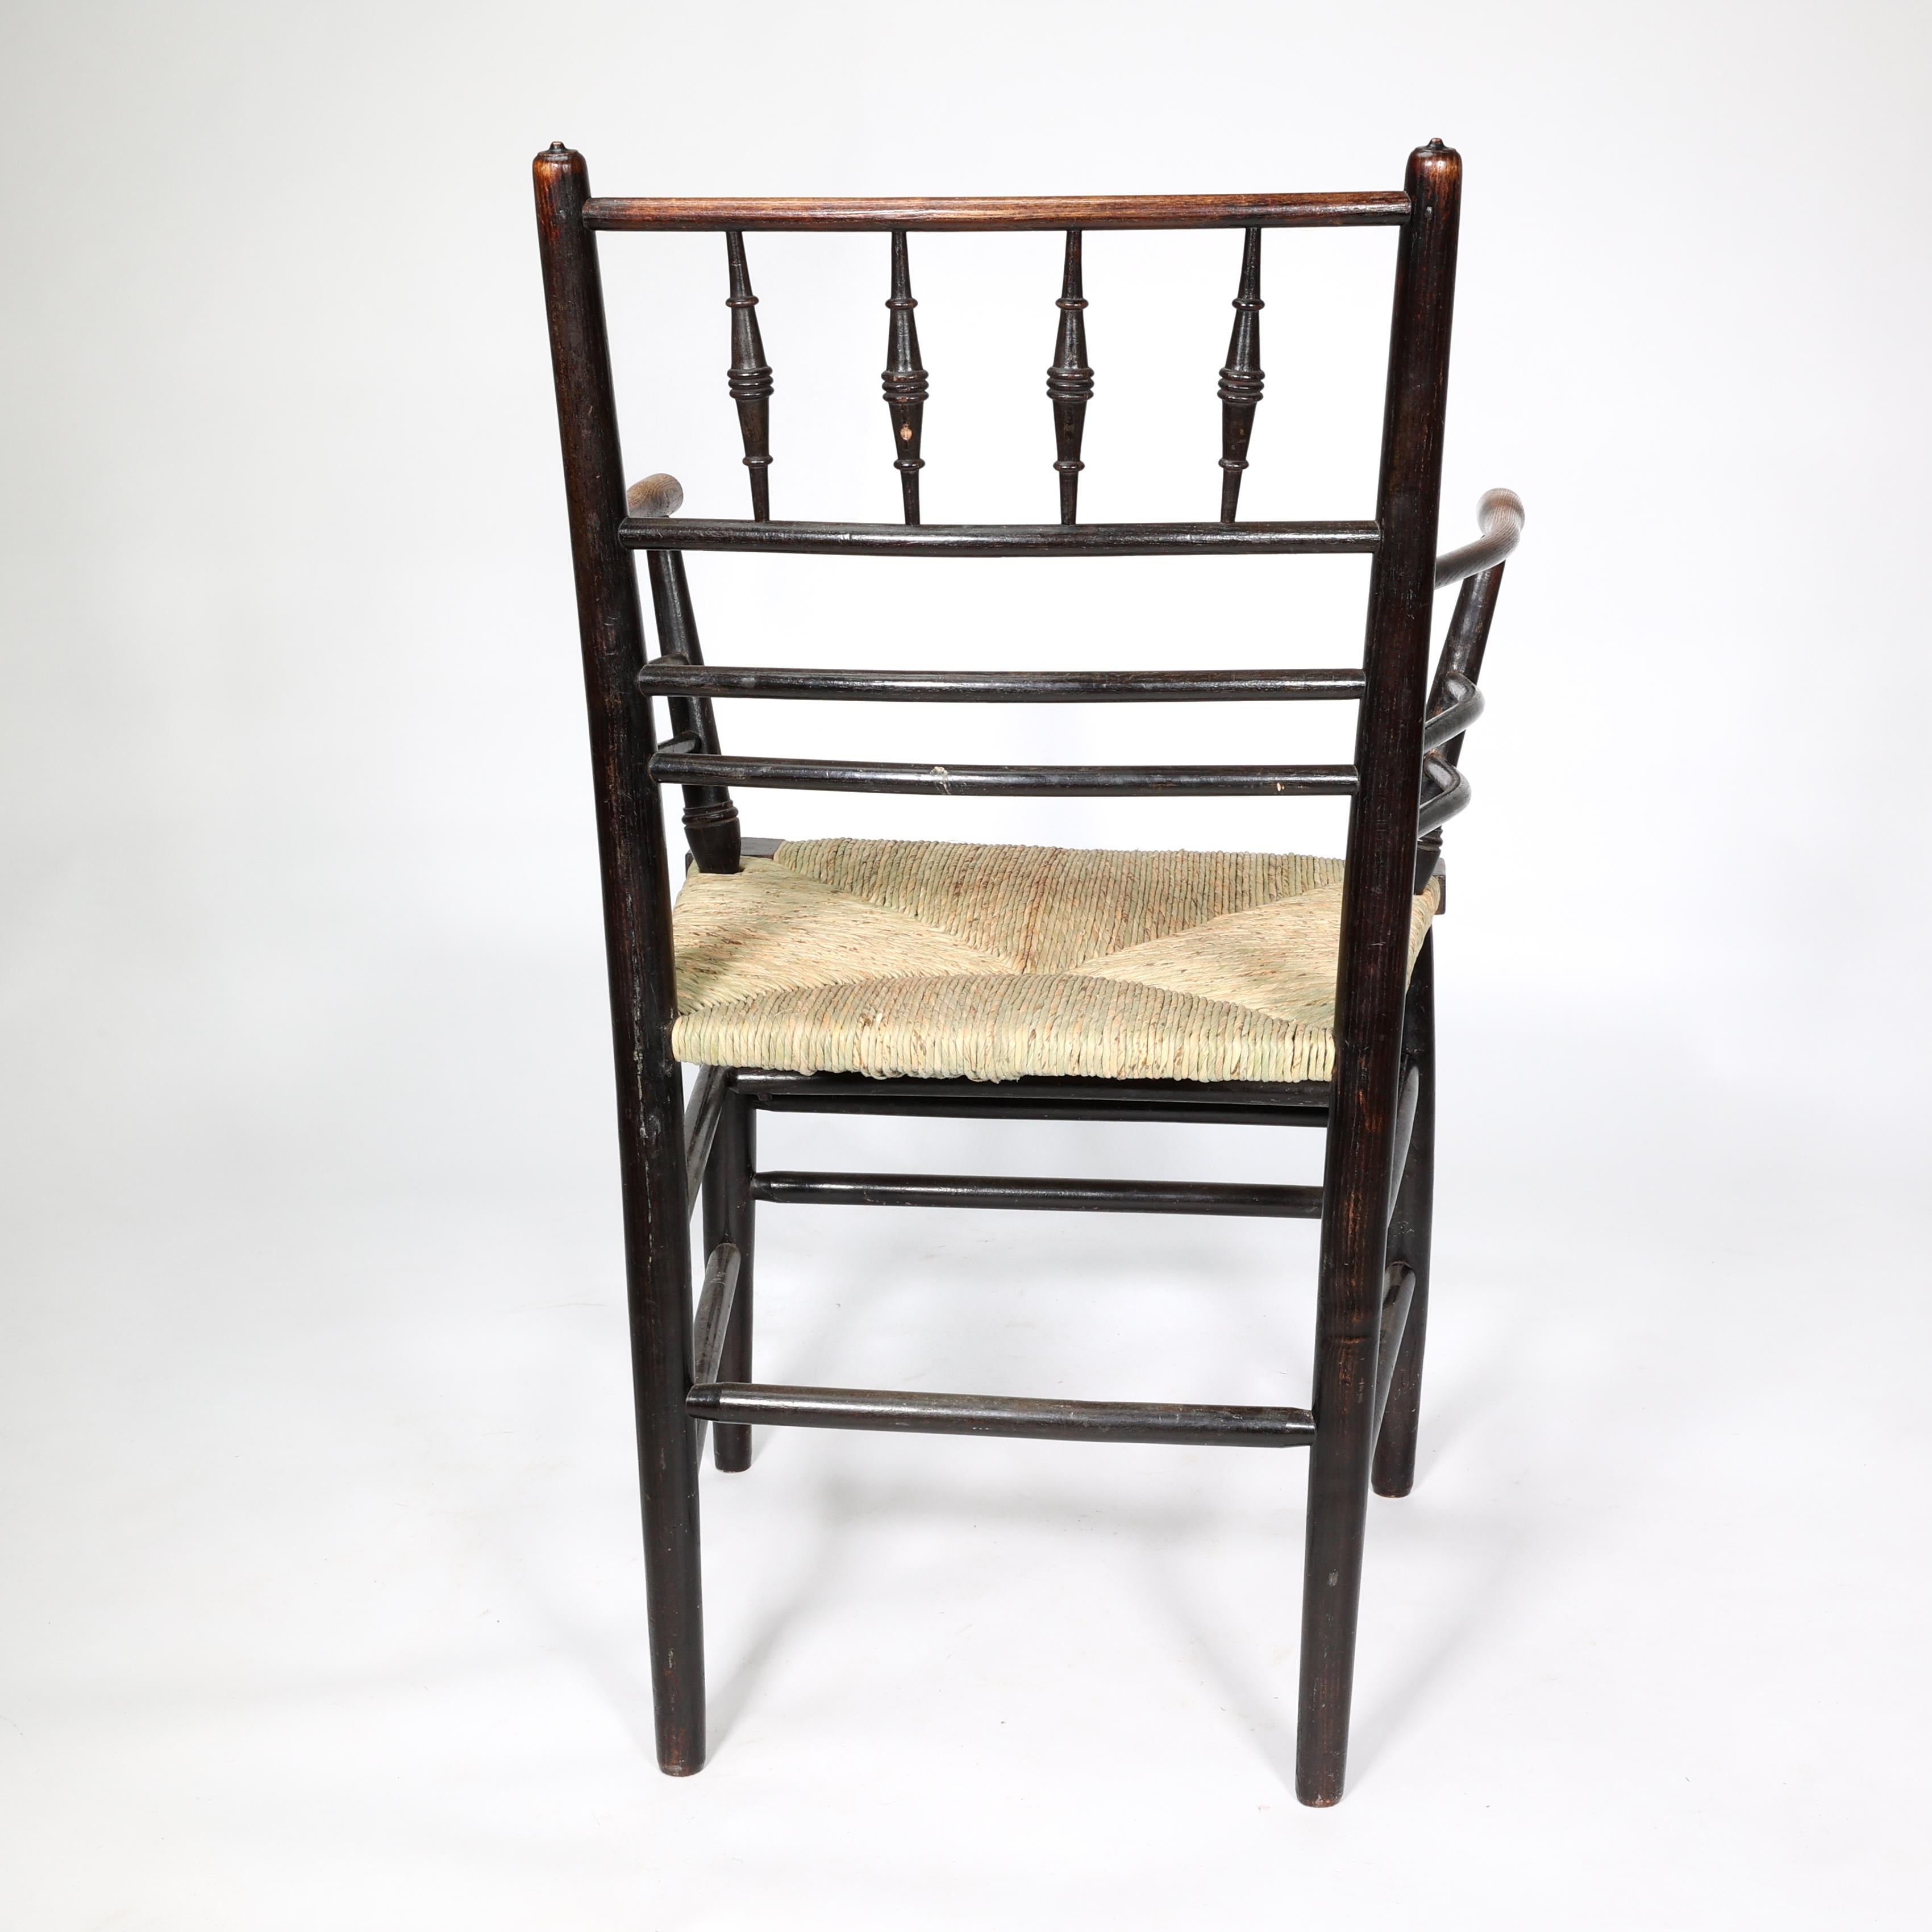 William Morris, A Classic Arts & Crafts Ebonised Armchair from the Sussex Range. 7